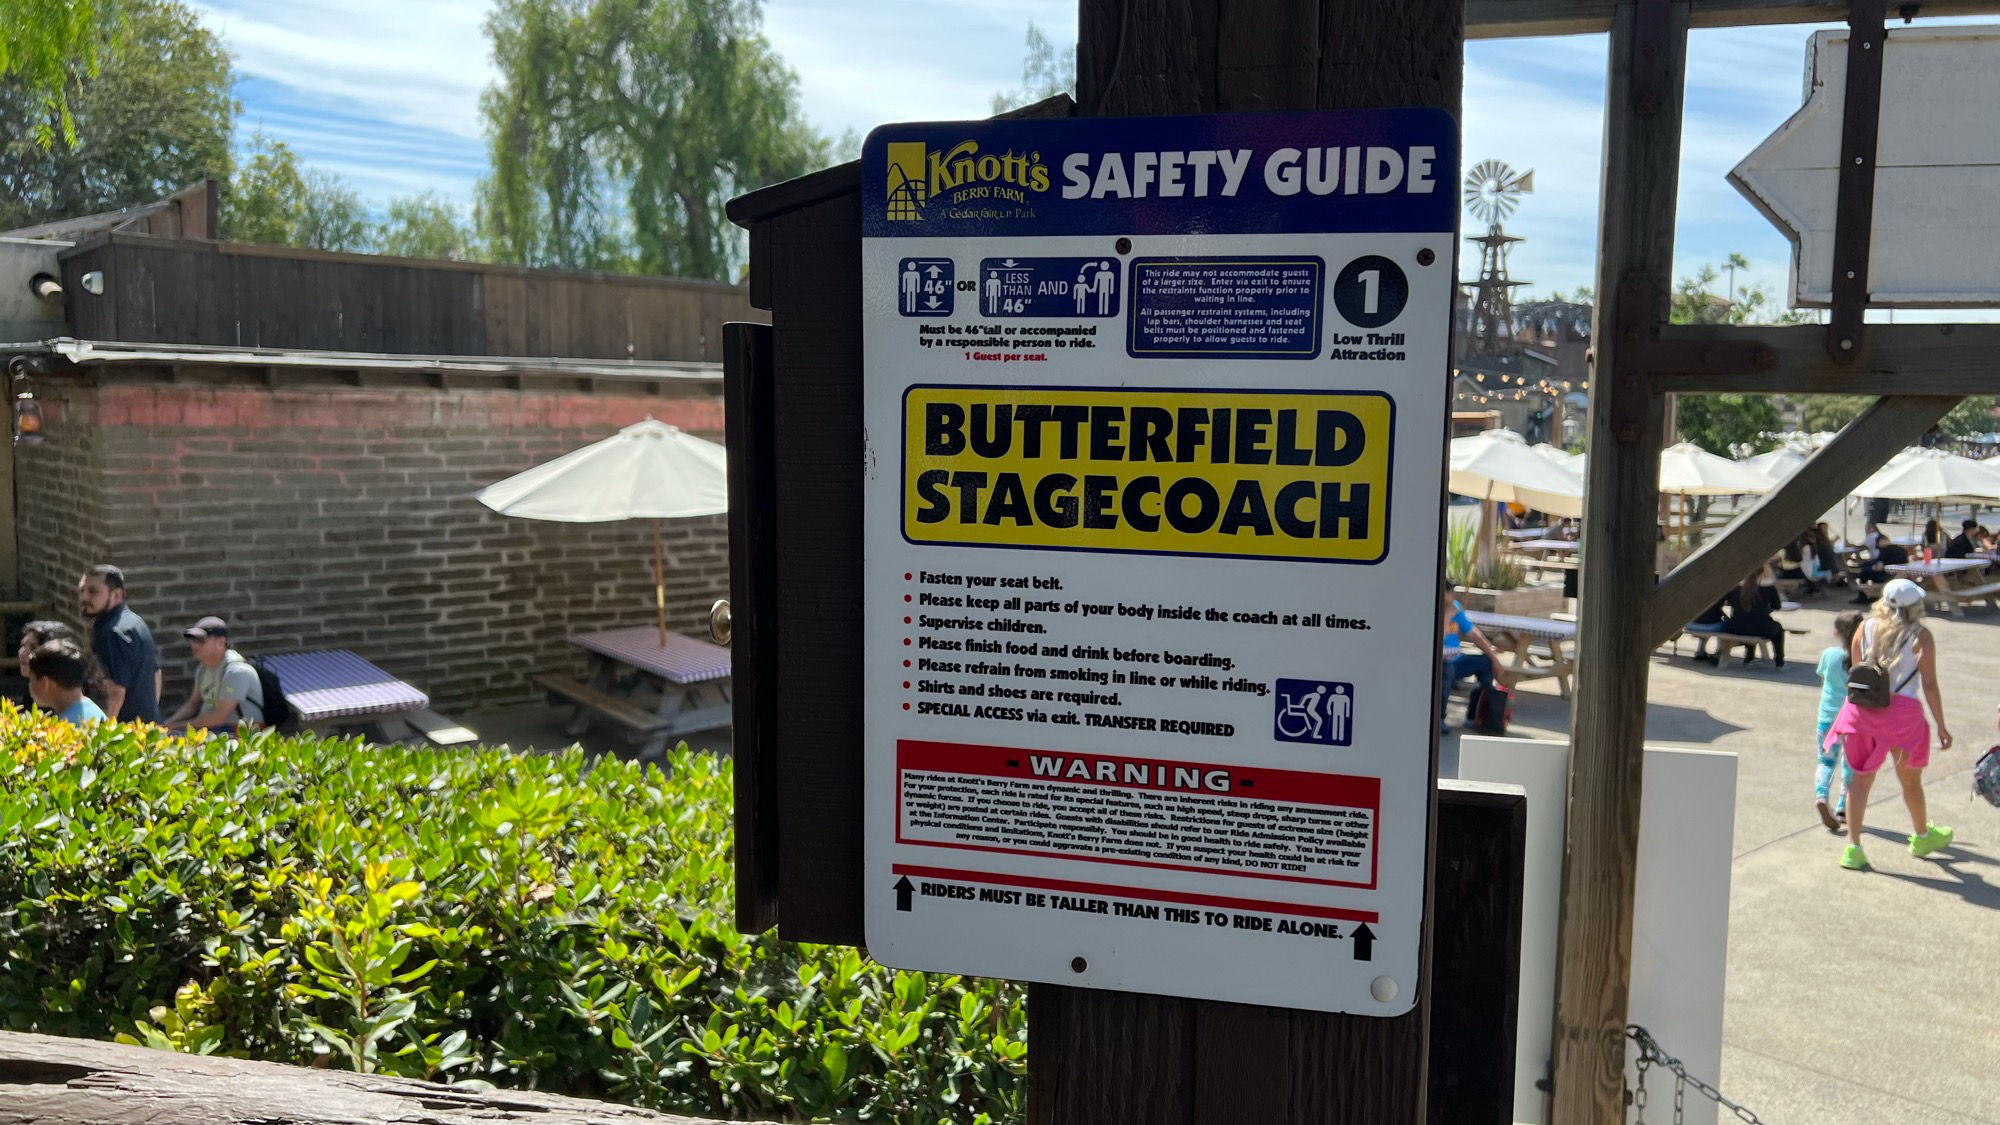 Butterfield Stagecoach Safety Guide